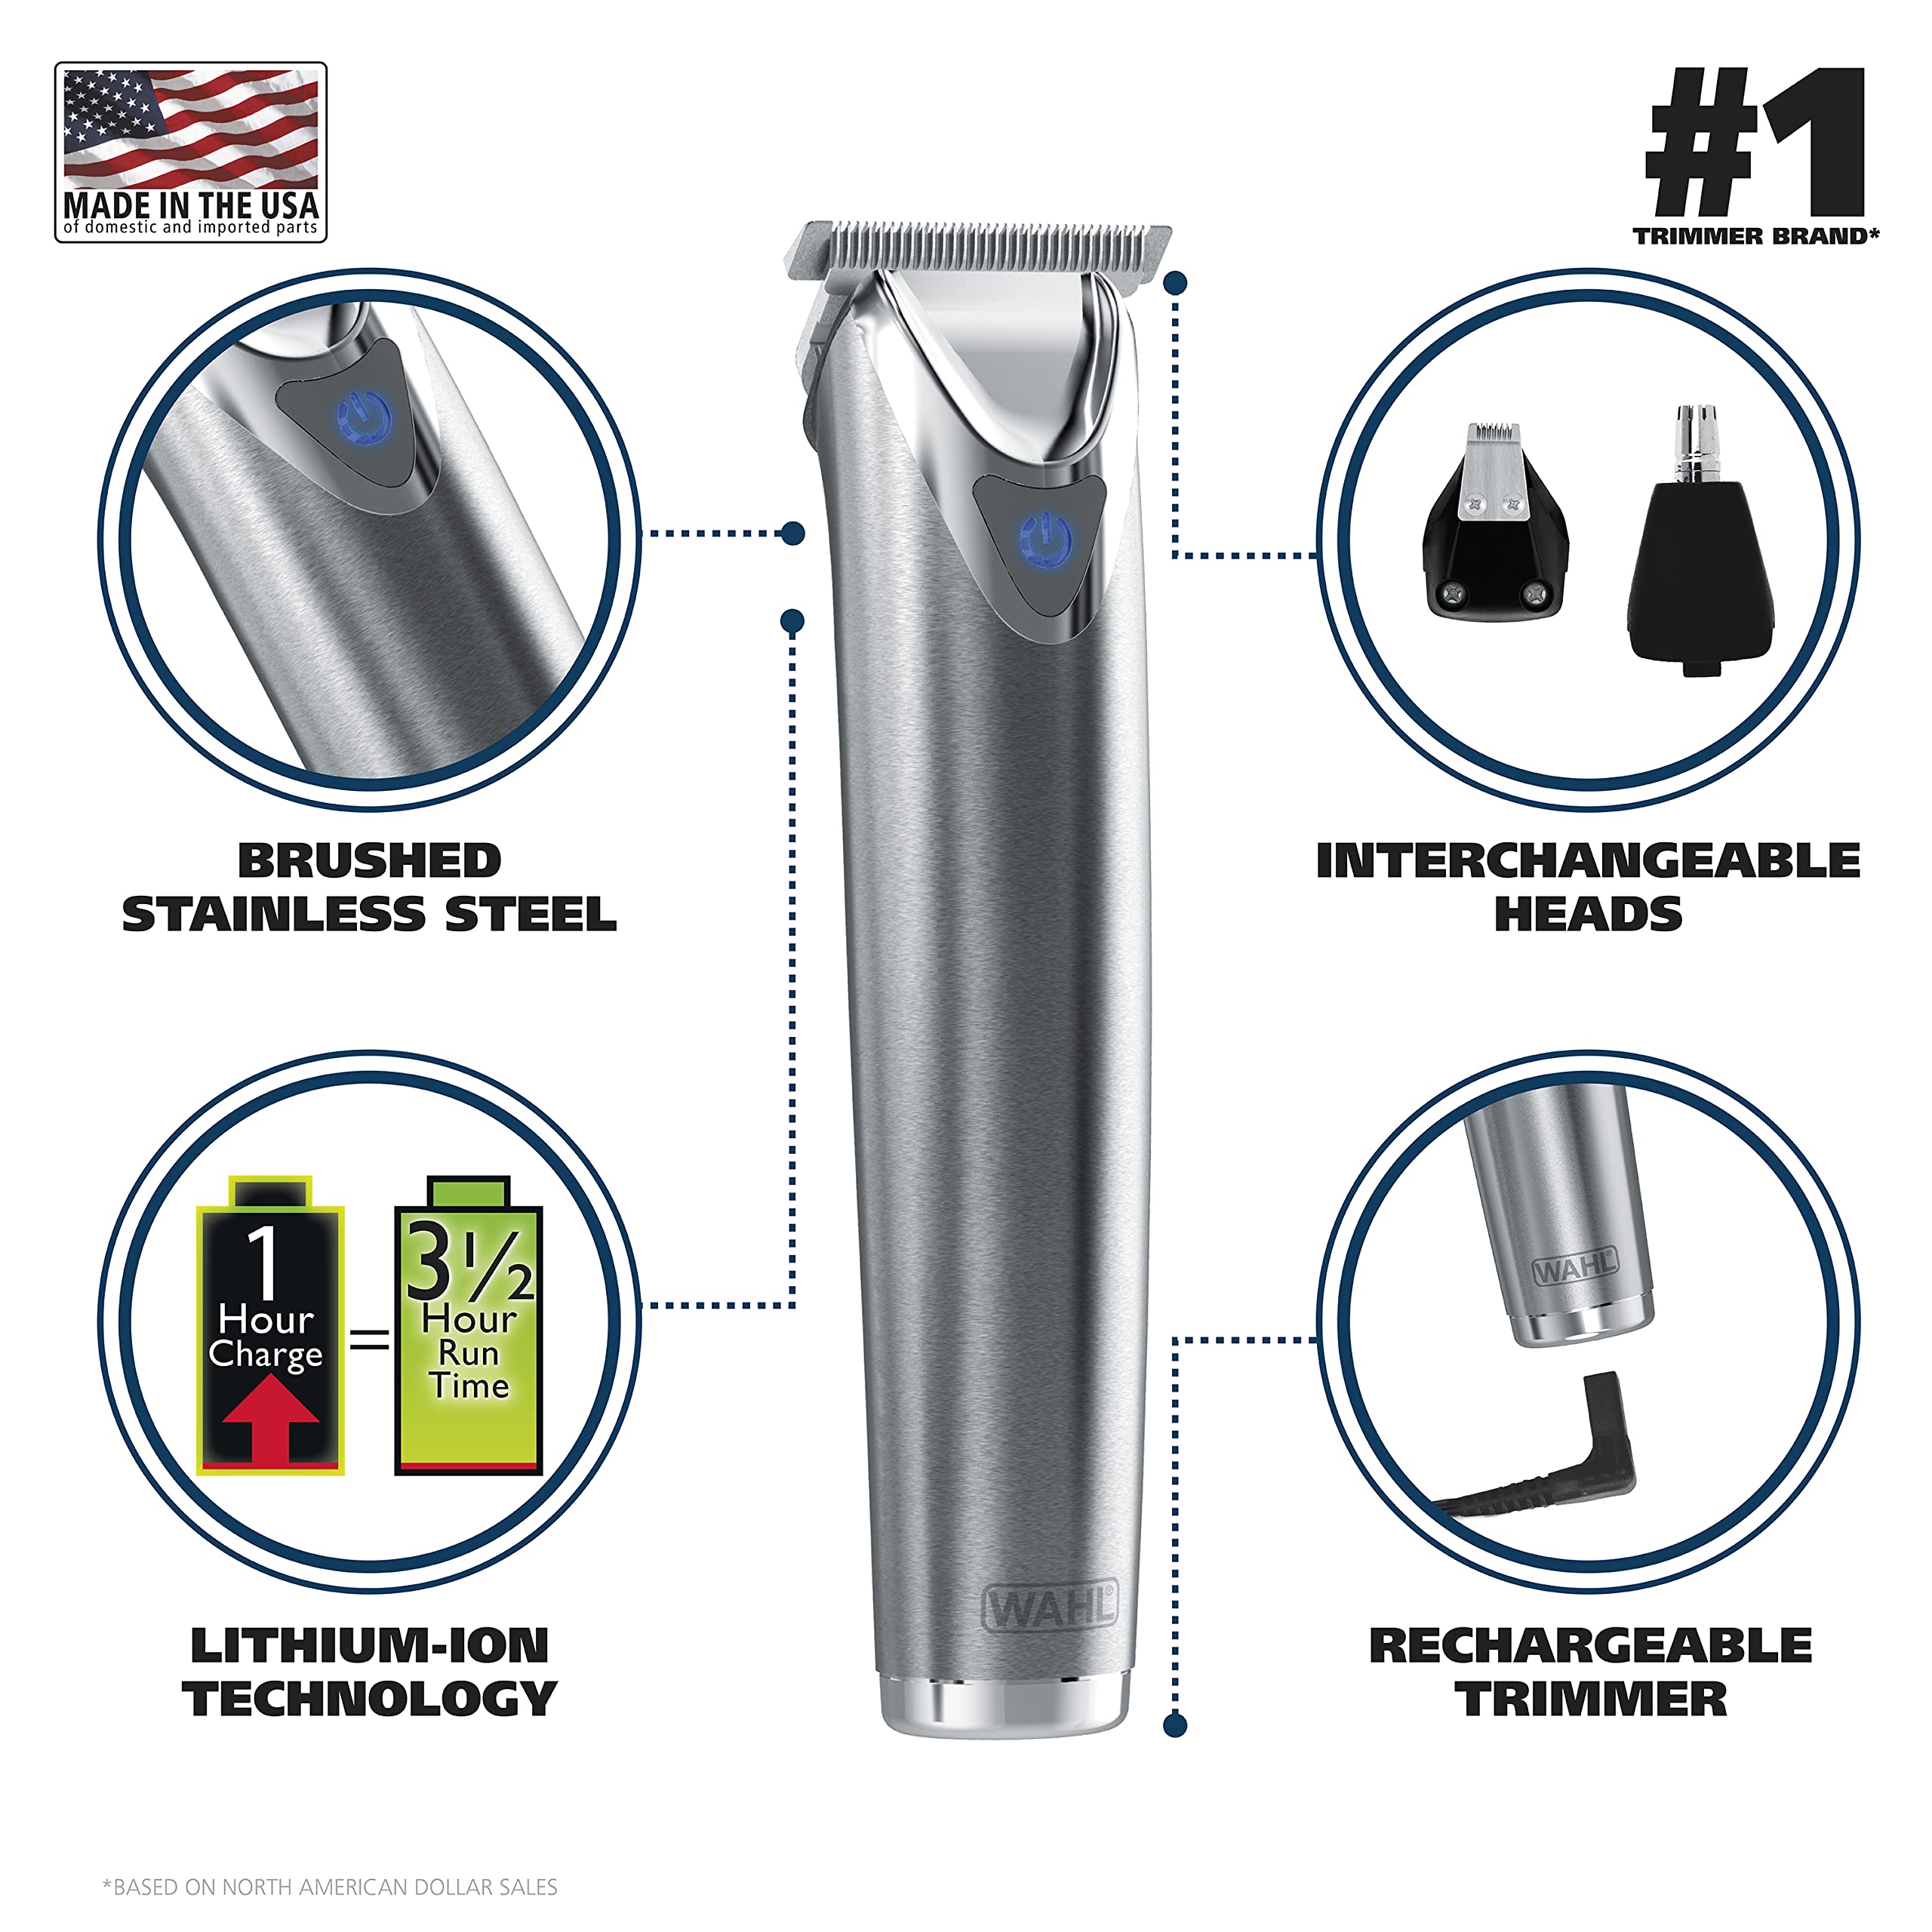 Wahl USA Stainless Steel Lithium-Ion Cordless Beard Trimmer for Men - Rechargeable All in One Men's Beard Trimmer with Rotary Ear & Nose Trimmer, & Detail Trimmer - Model 9818A